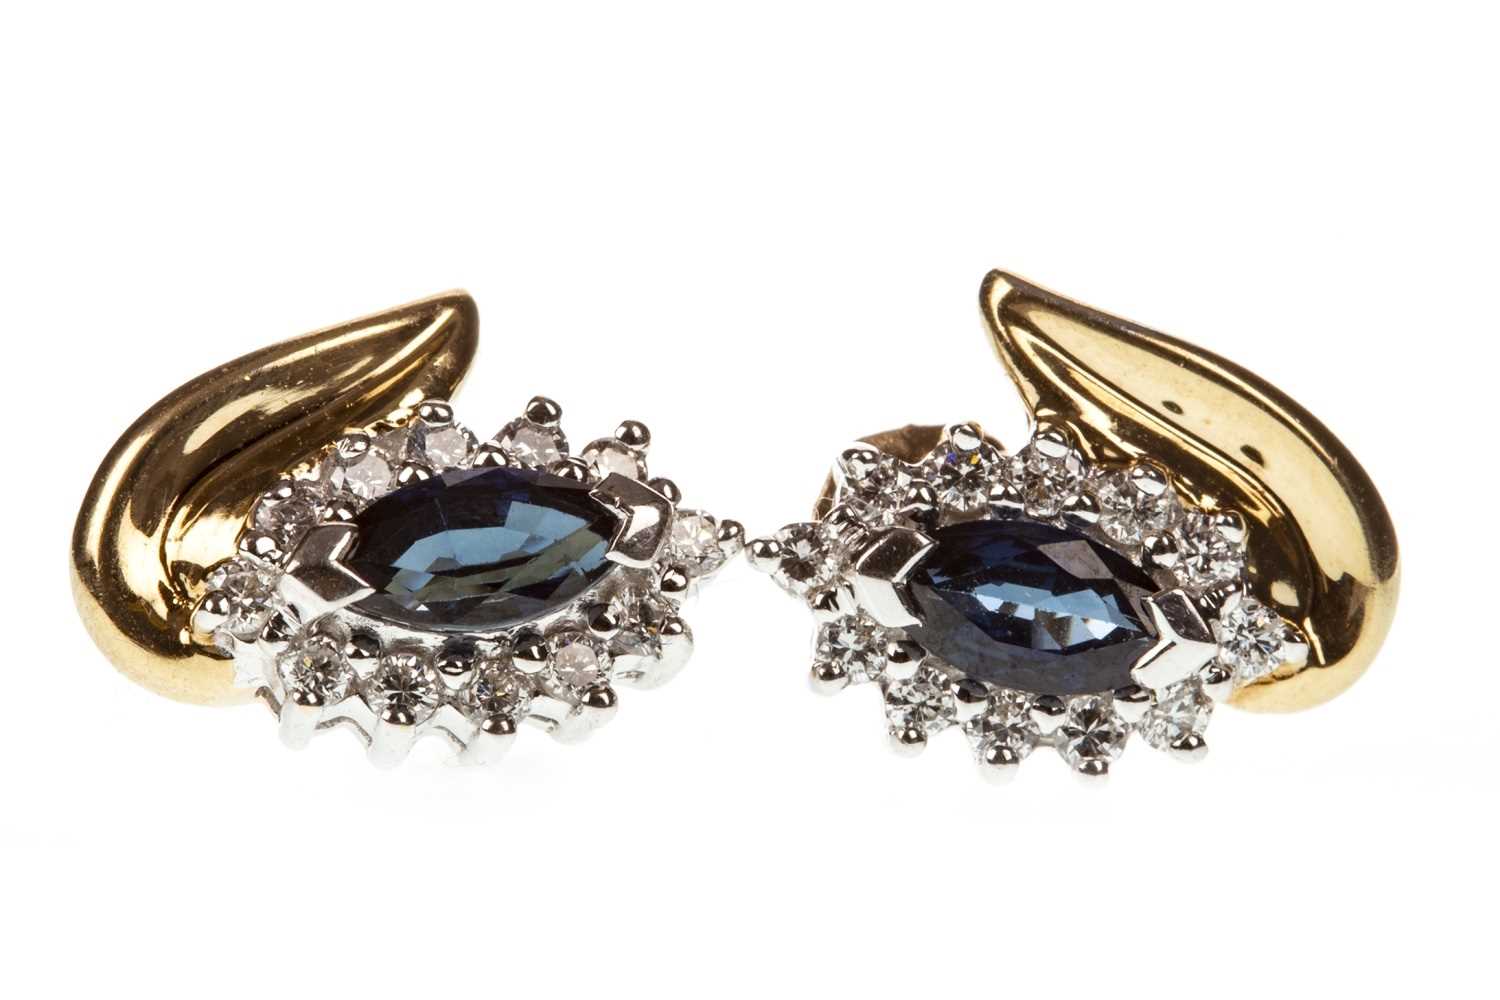 Lot 171 - A PAIR OF BLUE GEM  AND DIAMOND CLUSTER EARRINGS